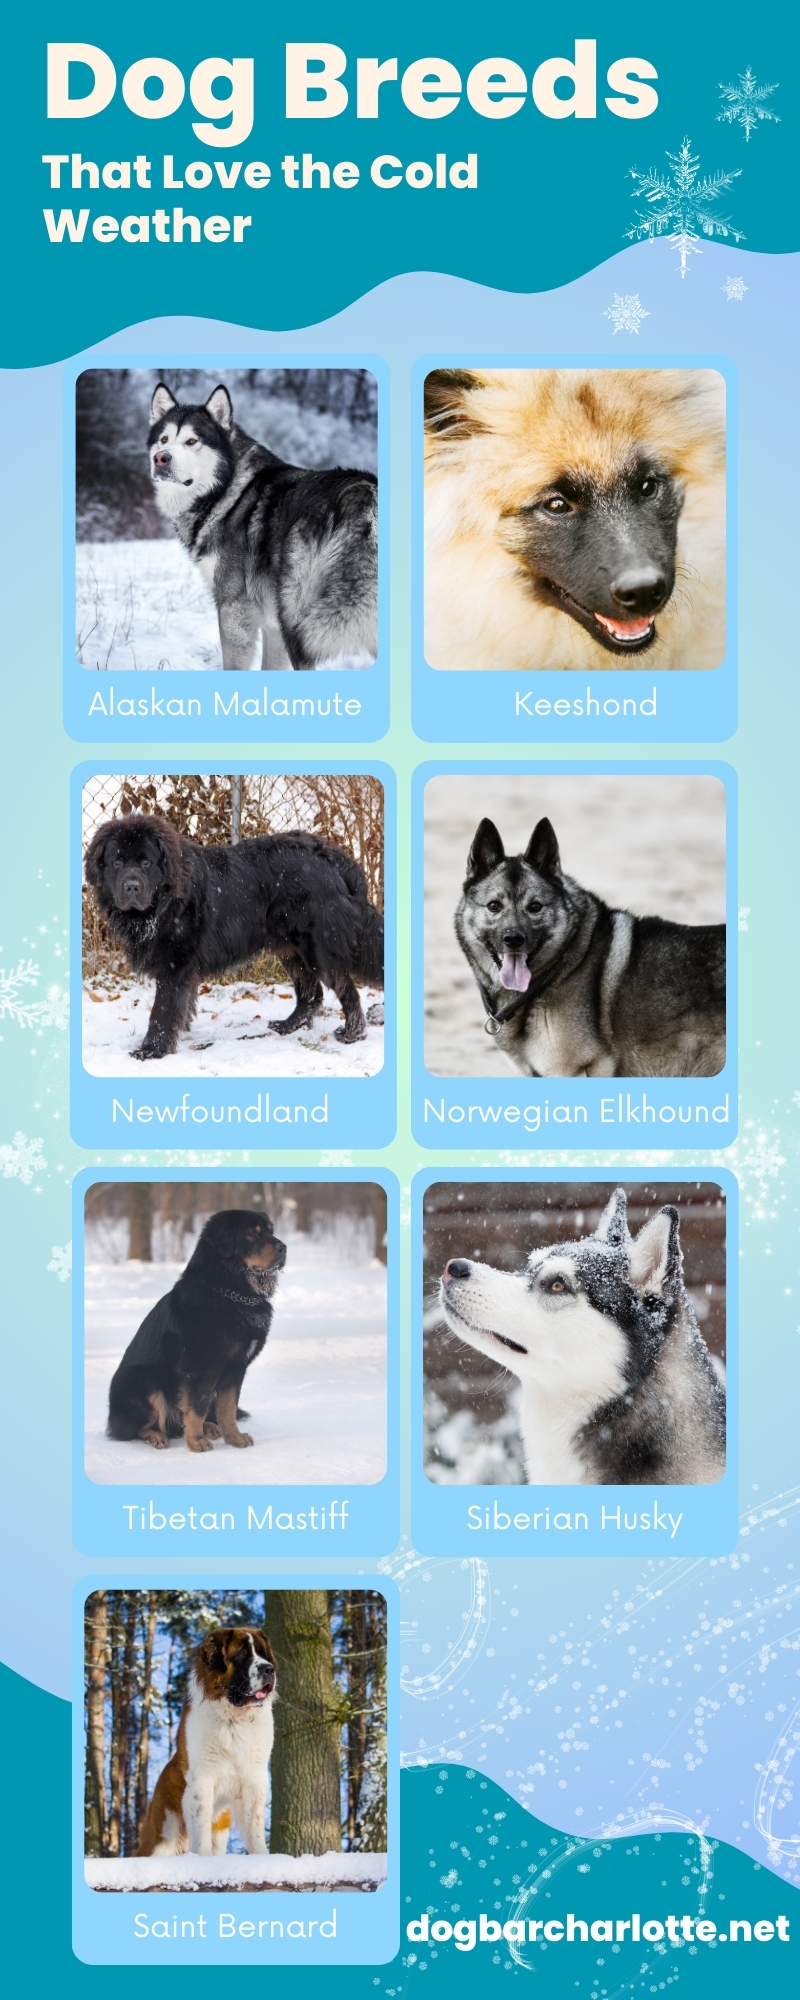 Dog Breeds That Love the Cold Weather Infographic